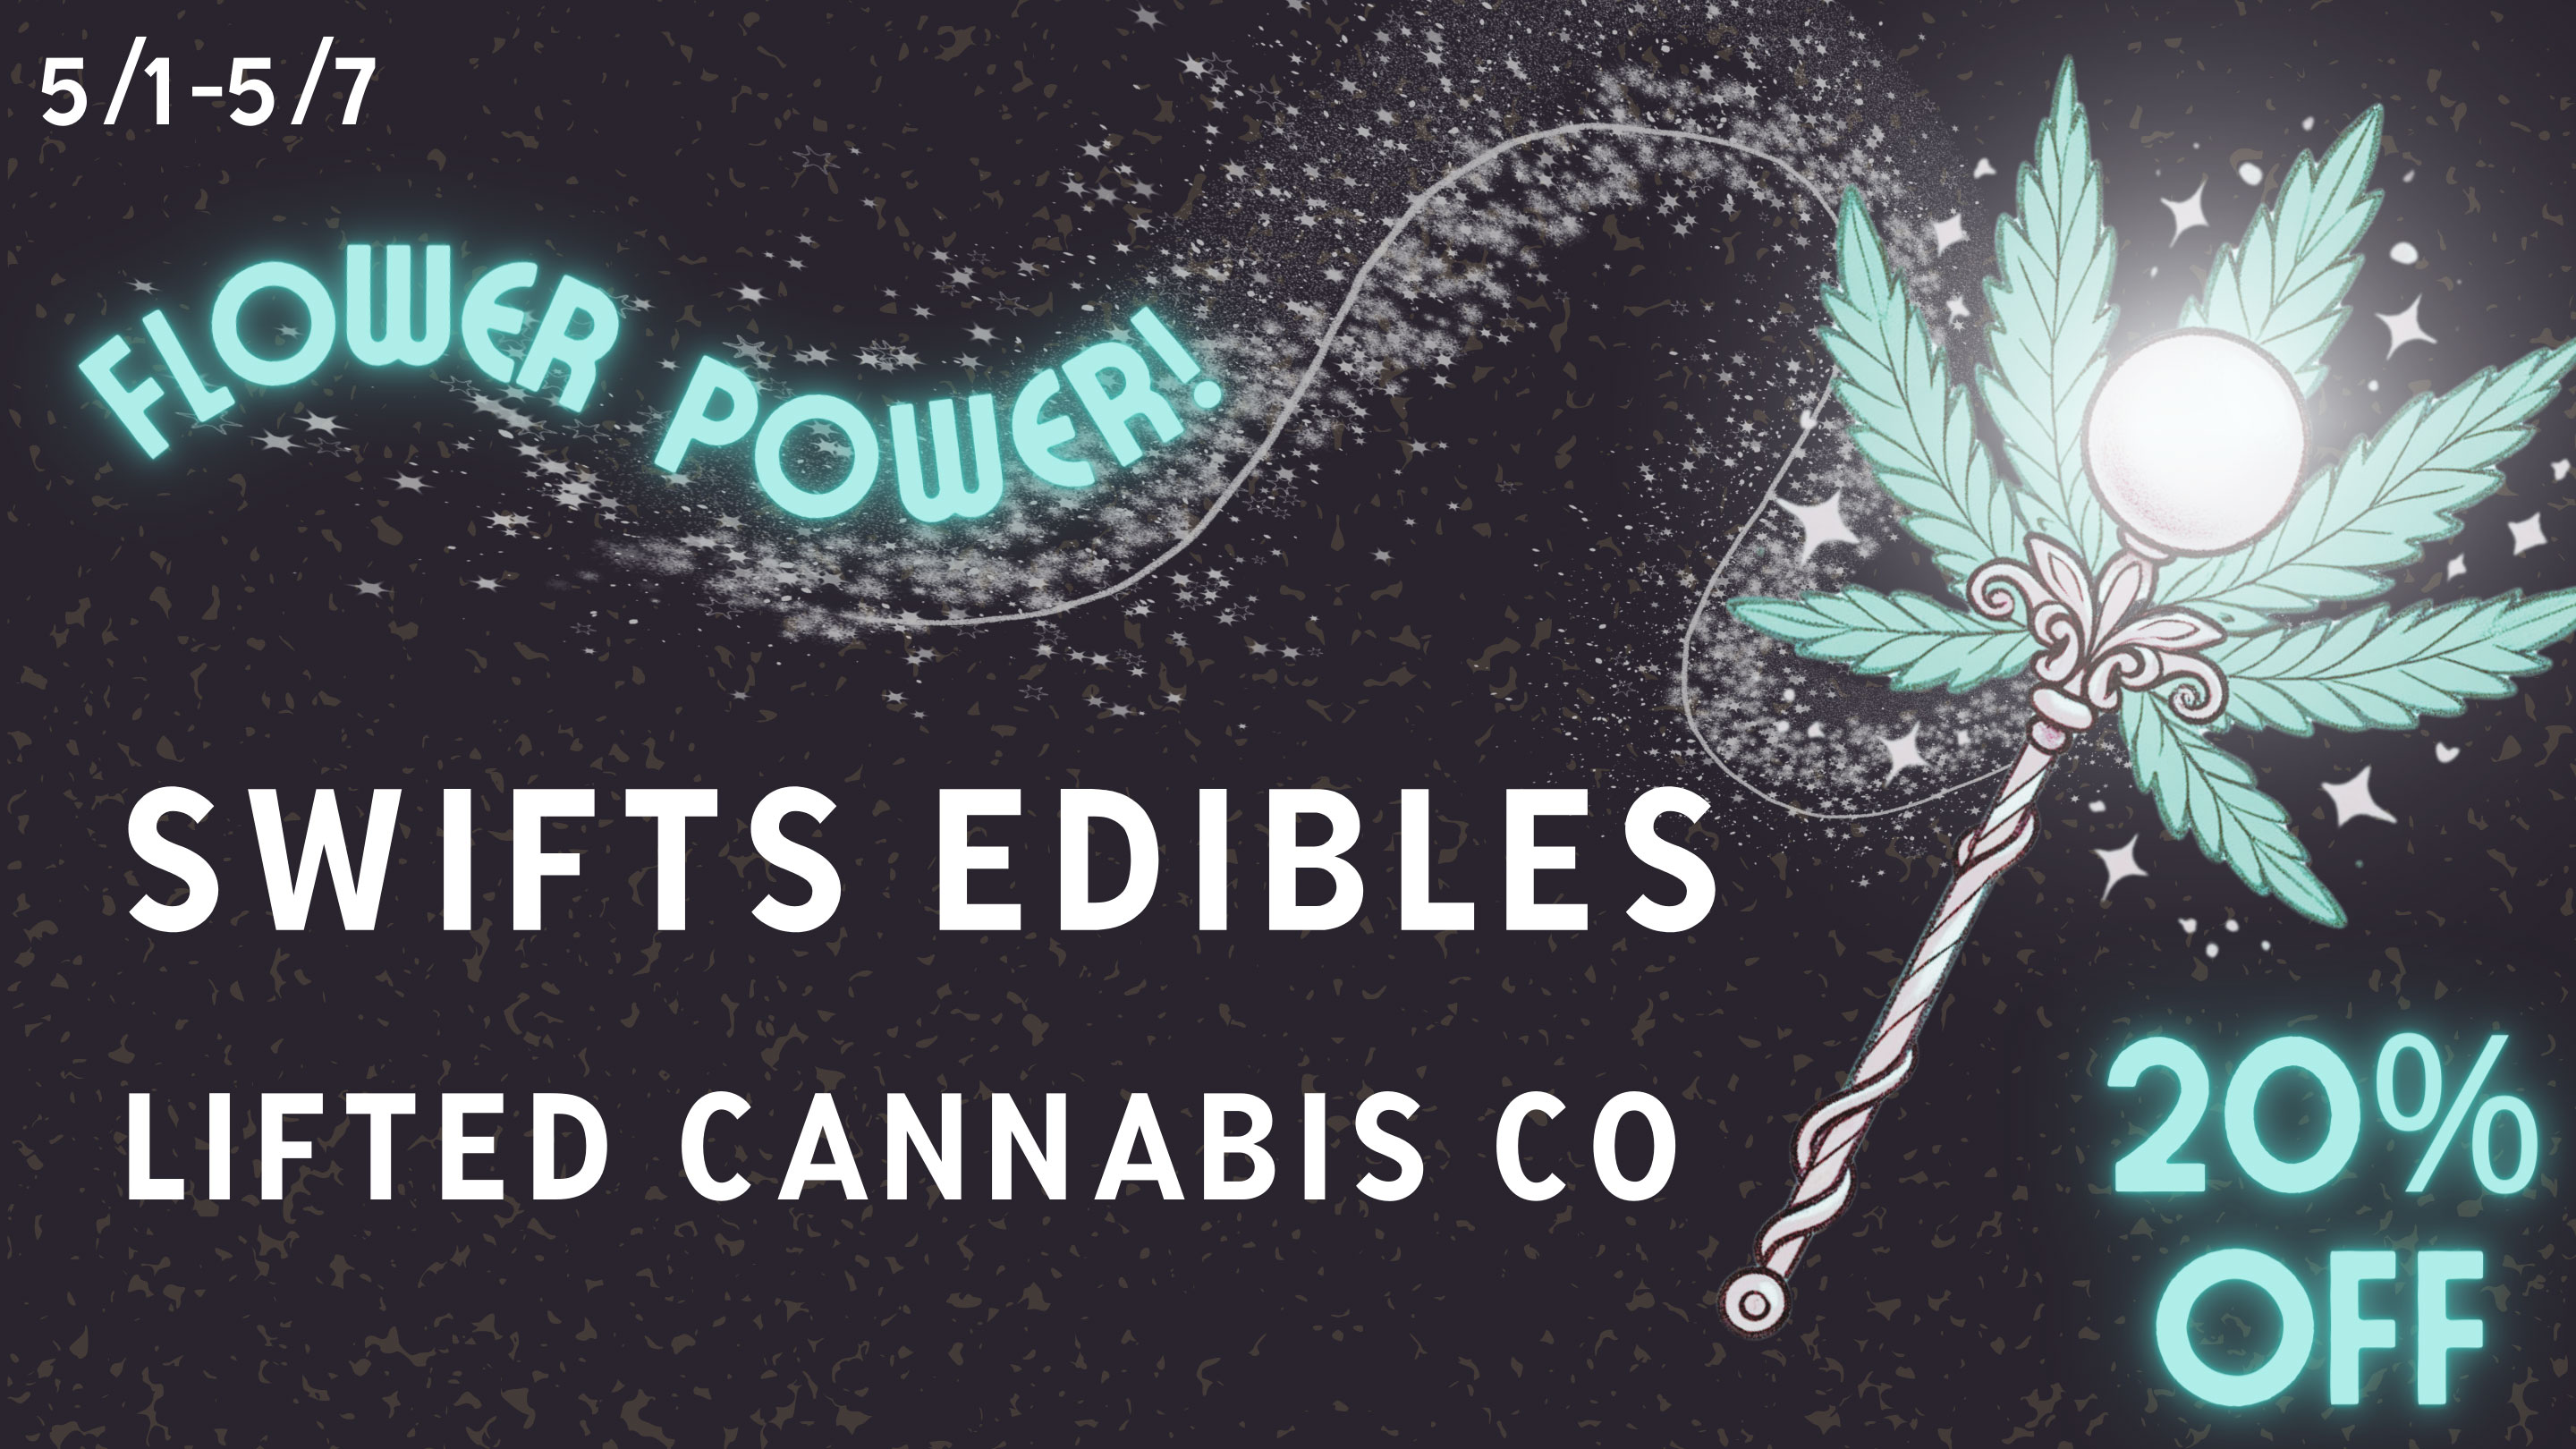 20% off Swifts edibles and Lifted Cannabis Co 5/1-5/7